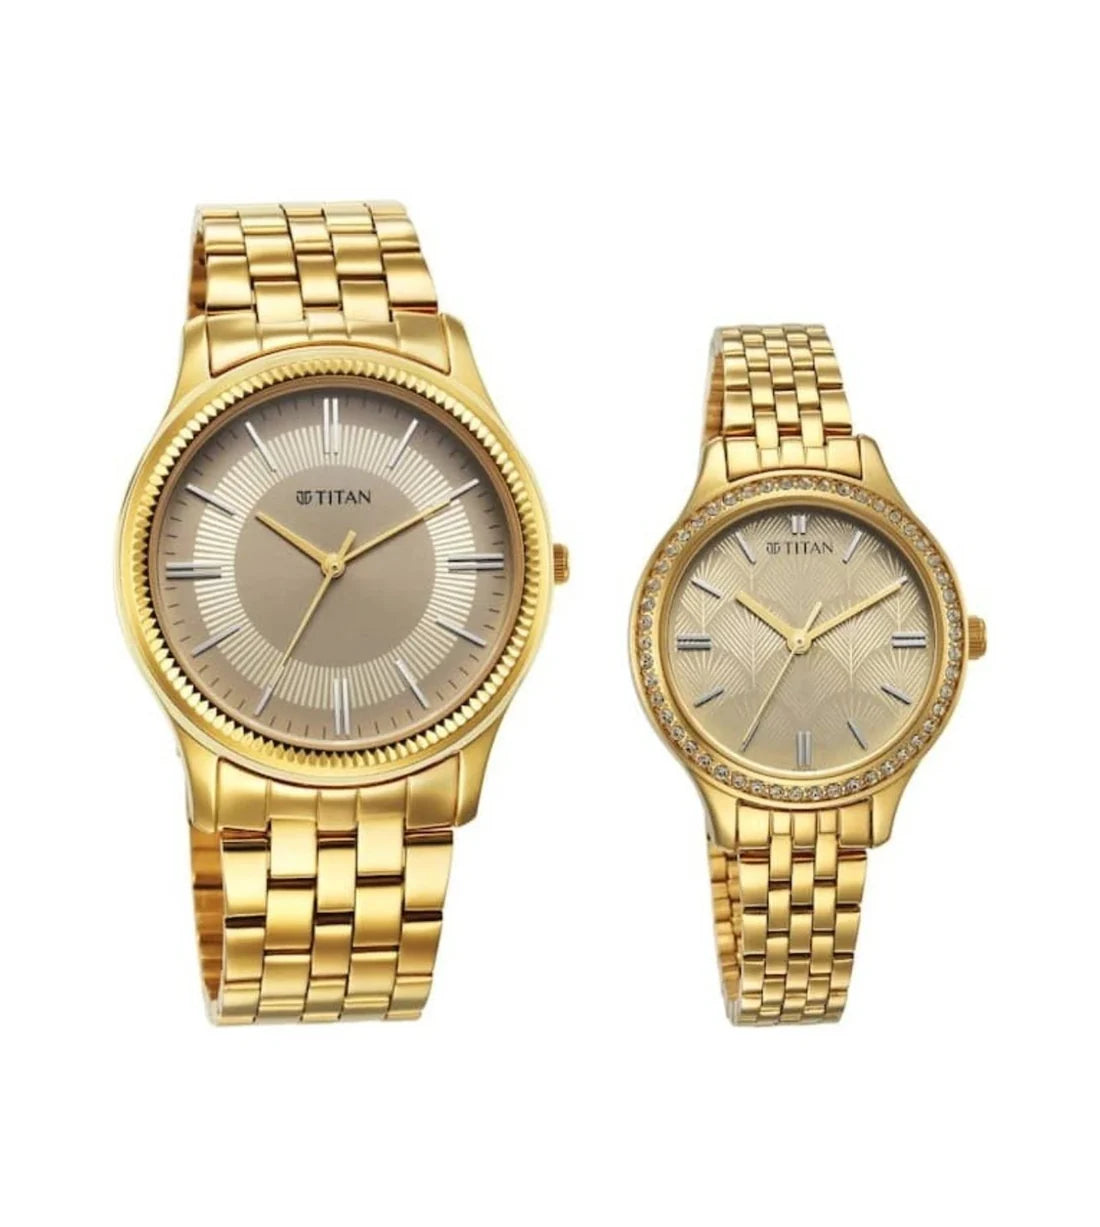 Shp Now Titan Karishma Bandhan Analog for Couple Watch | Watches & Accessories | Best Watches in Bahrain | Halabh.com